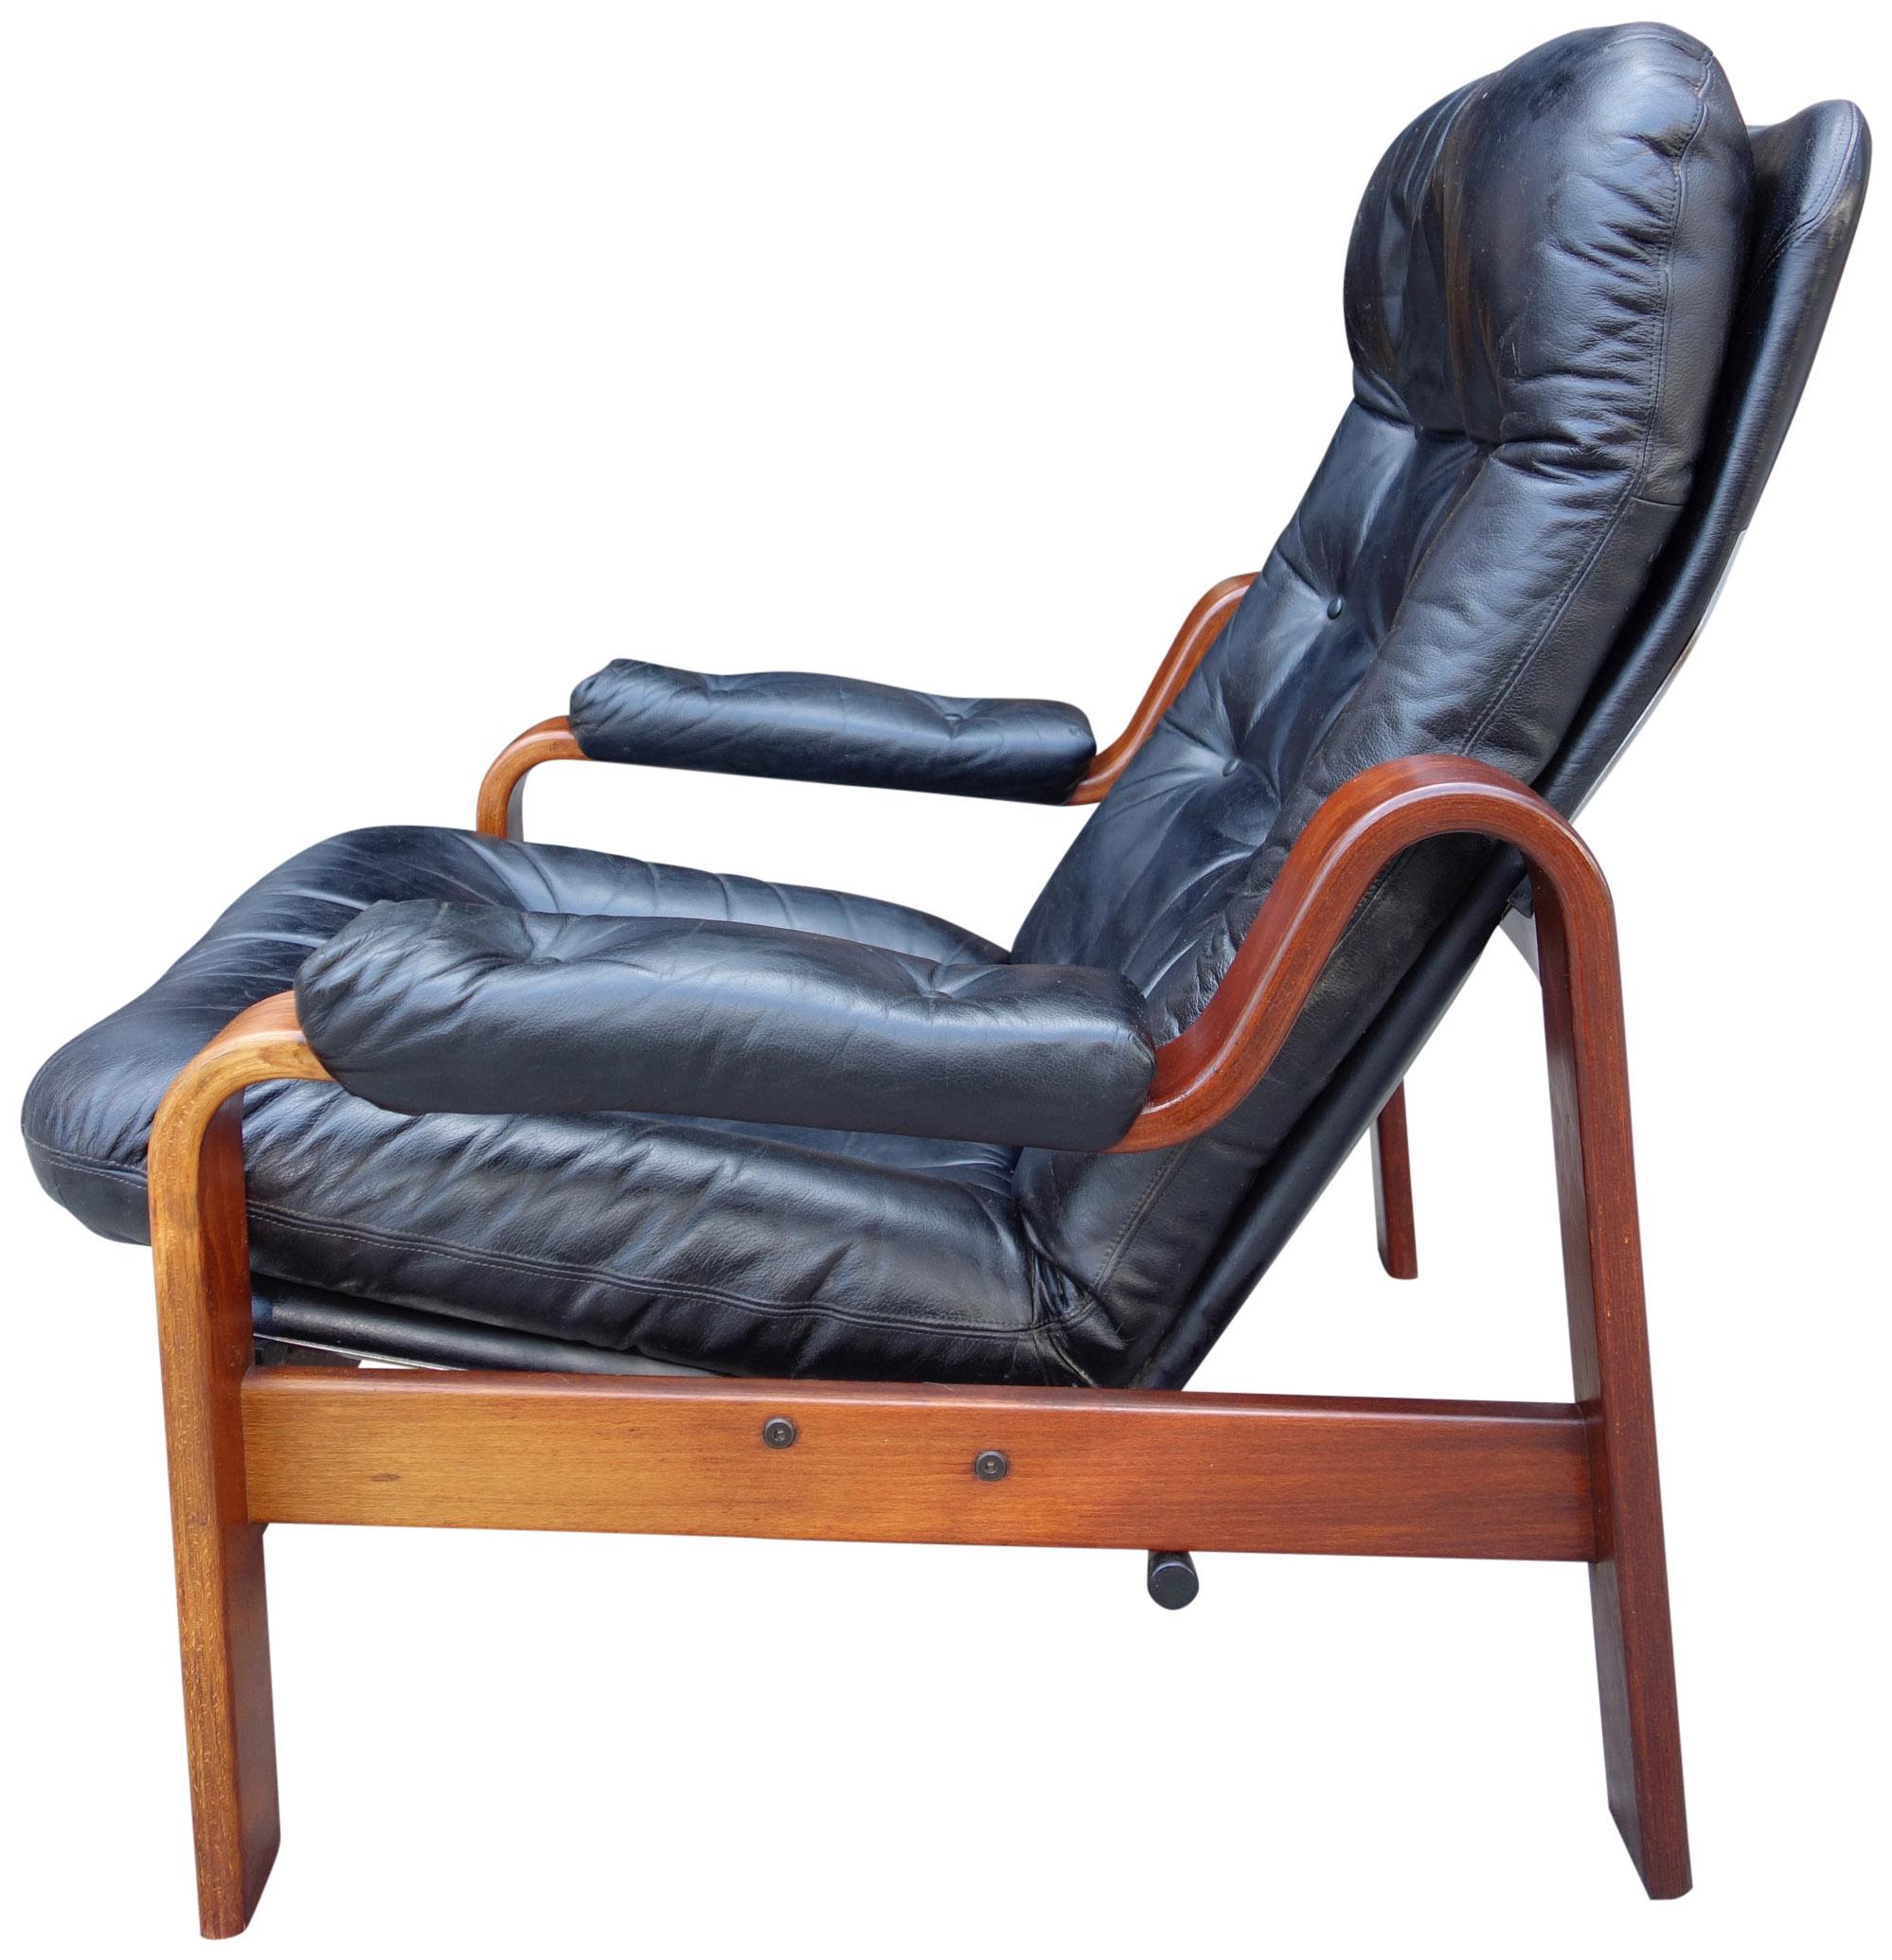 Beautiful -Relax II - lounge chair with original leather featuring bent walnut with chrome details. A Scandinavian design made in Sweden and similar to Thonet, Saarinen, Aalto and Eames by utilizing bent wood that was a new technique at the time.